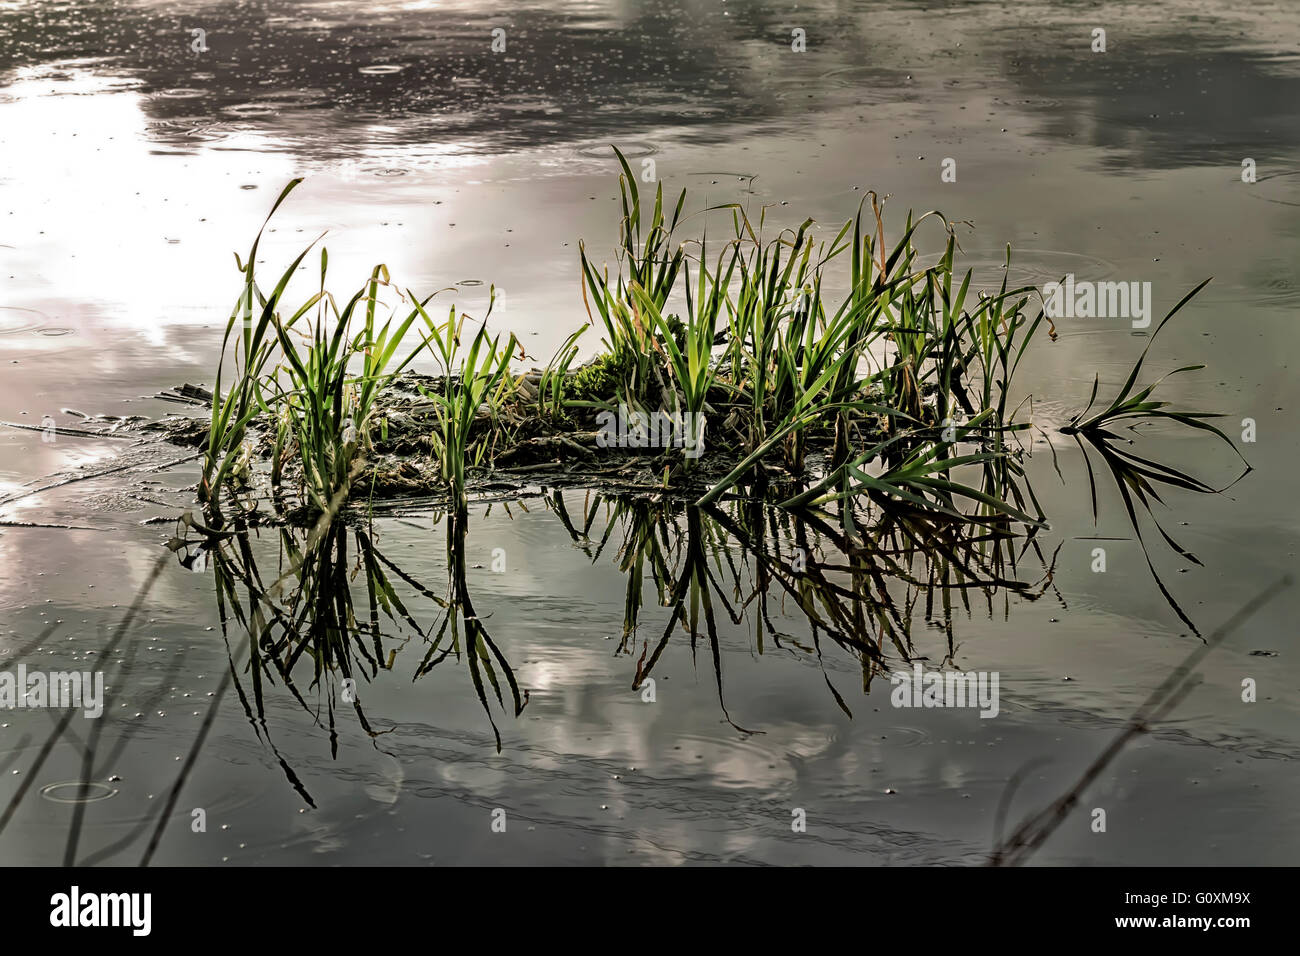 Island with grass in middle of water before storm Stock Photo